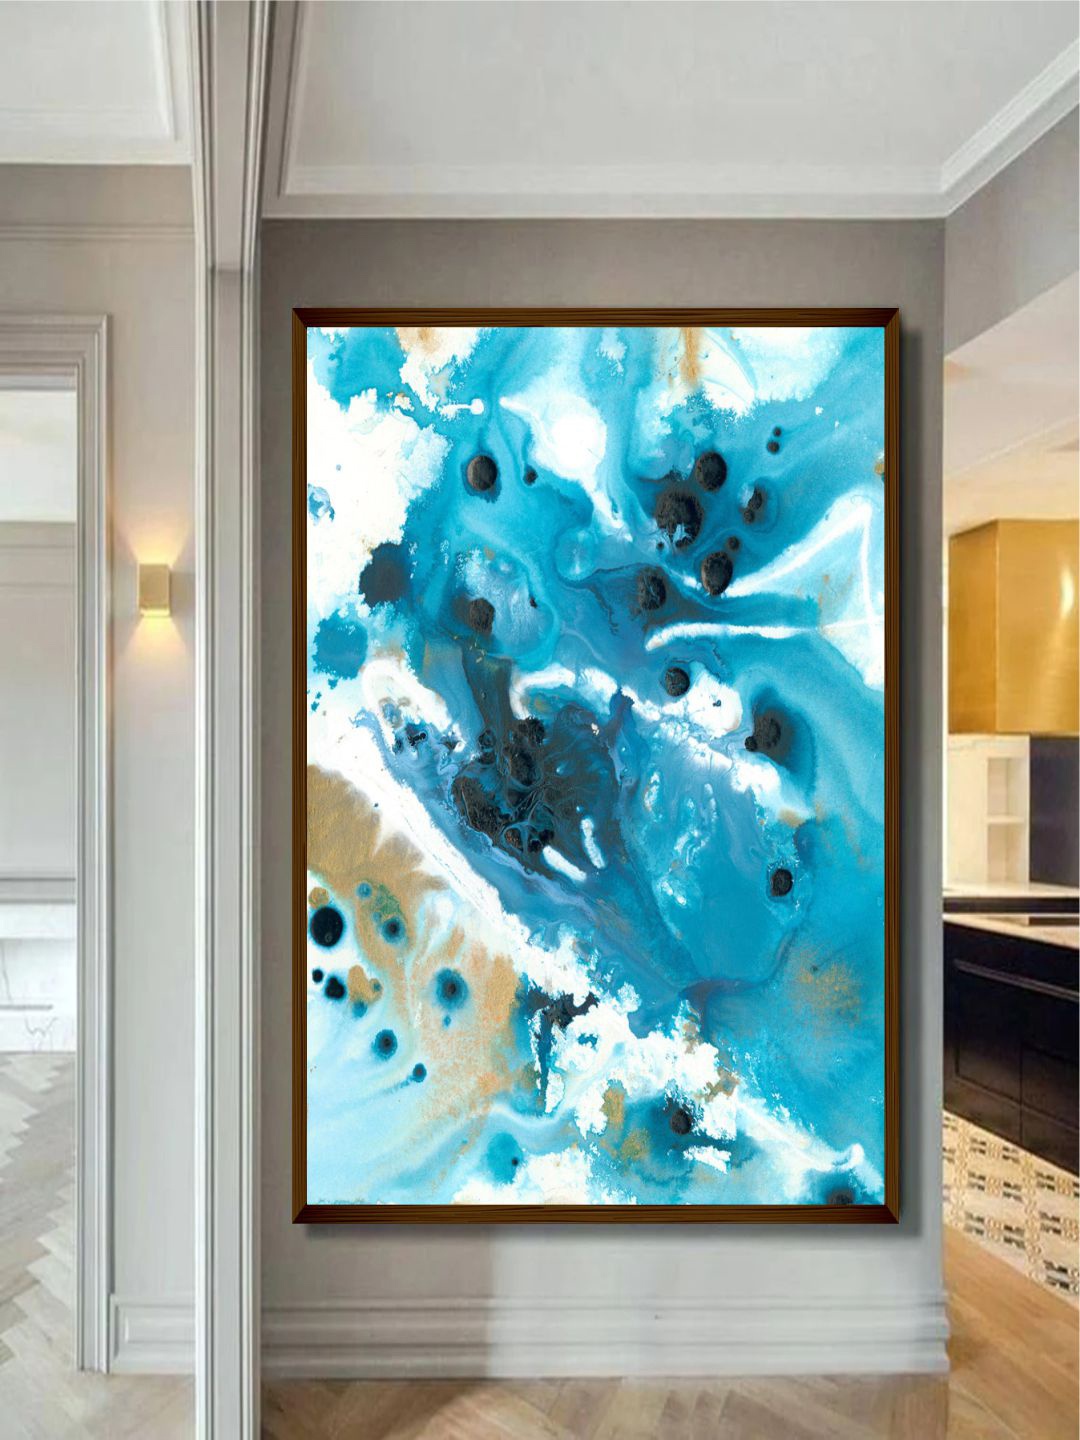 

The Art House Blue & White Abstract Framed Wall Painting